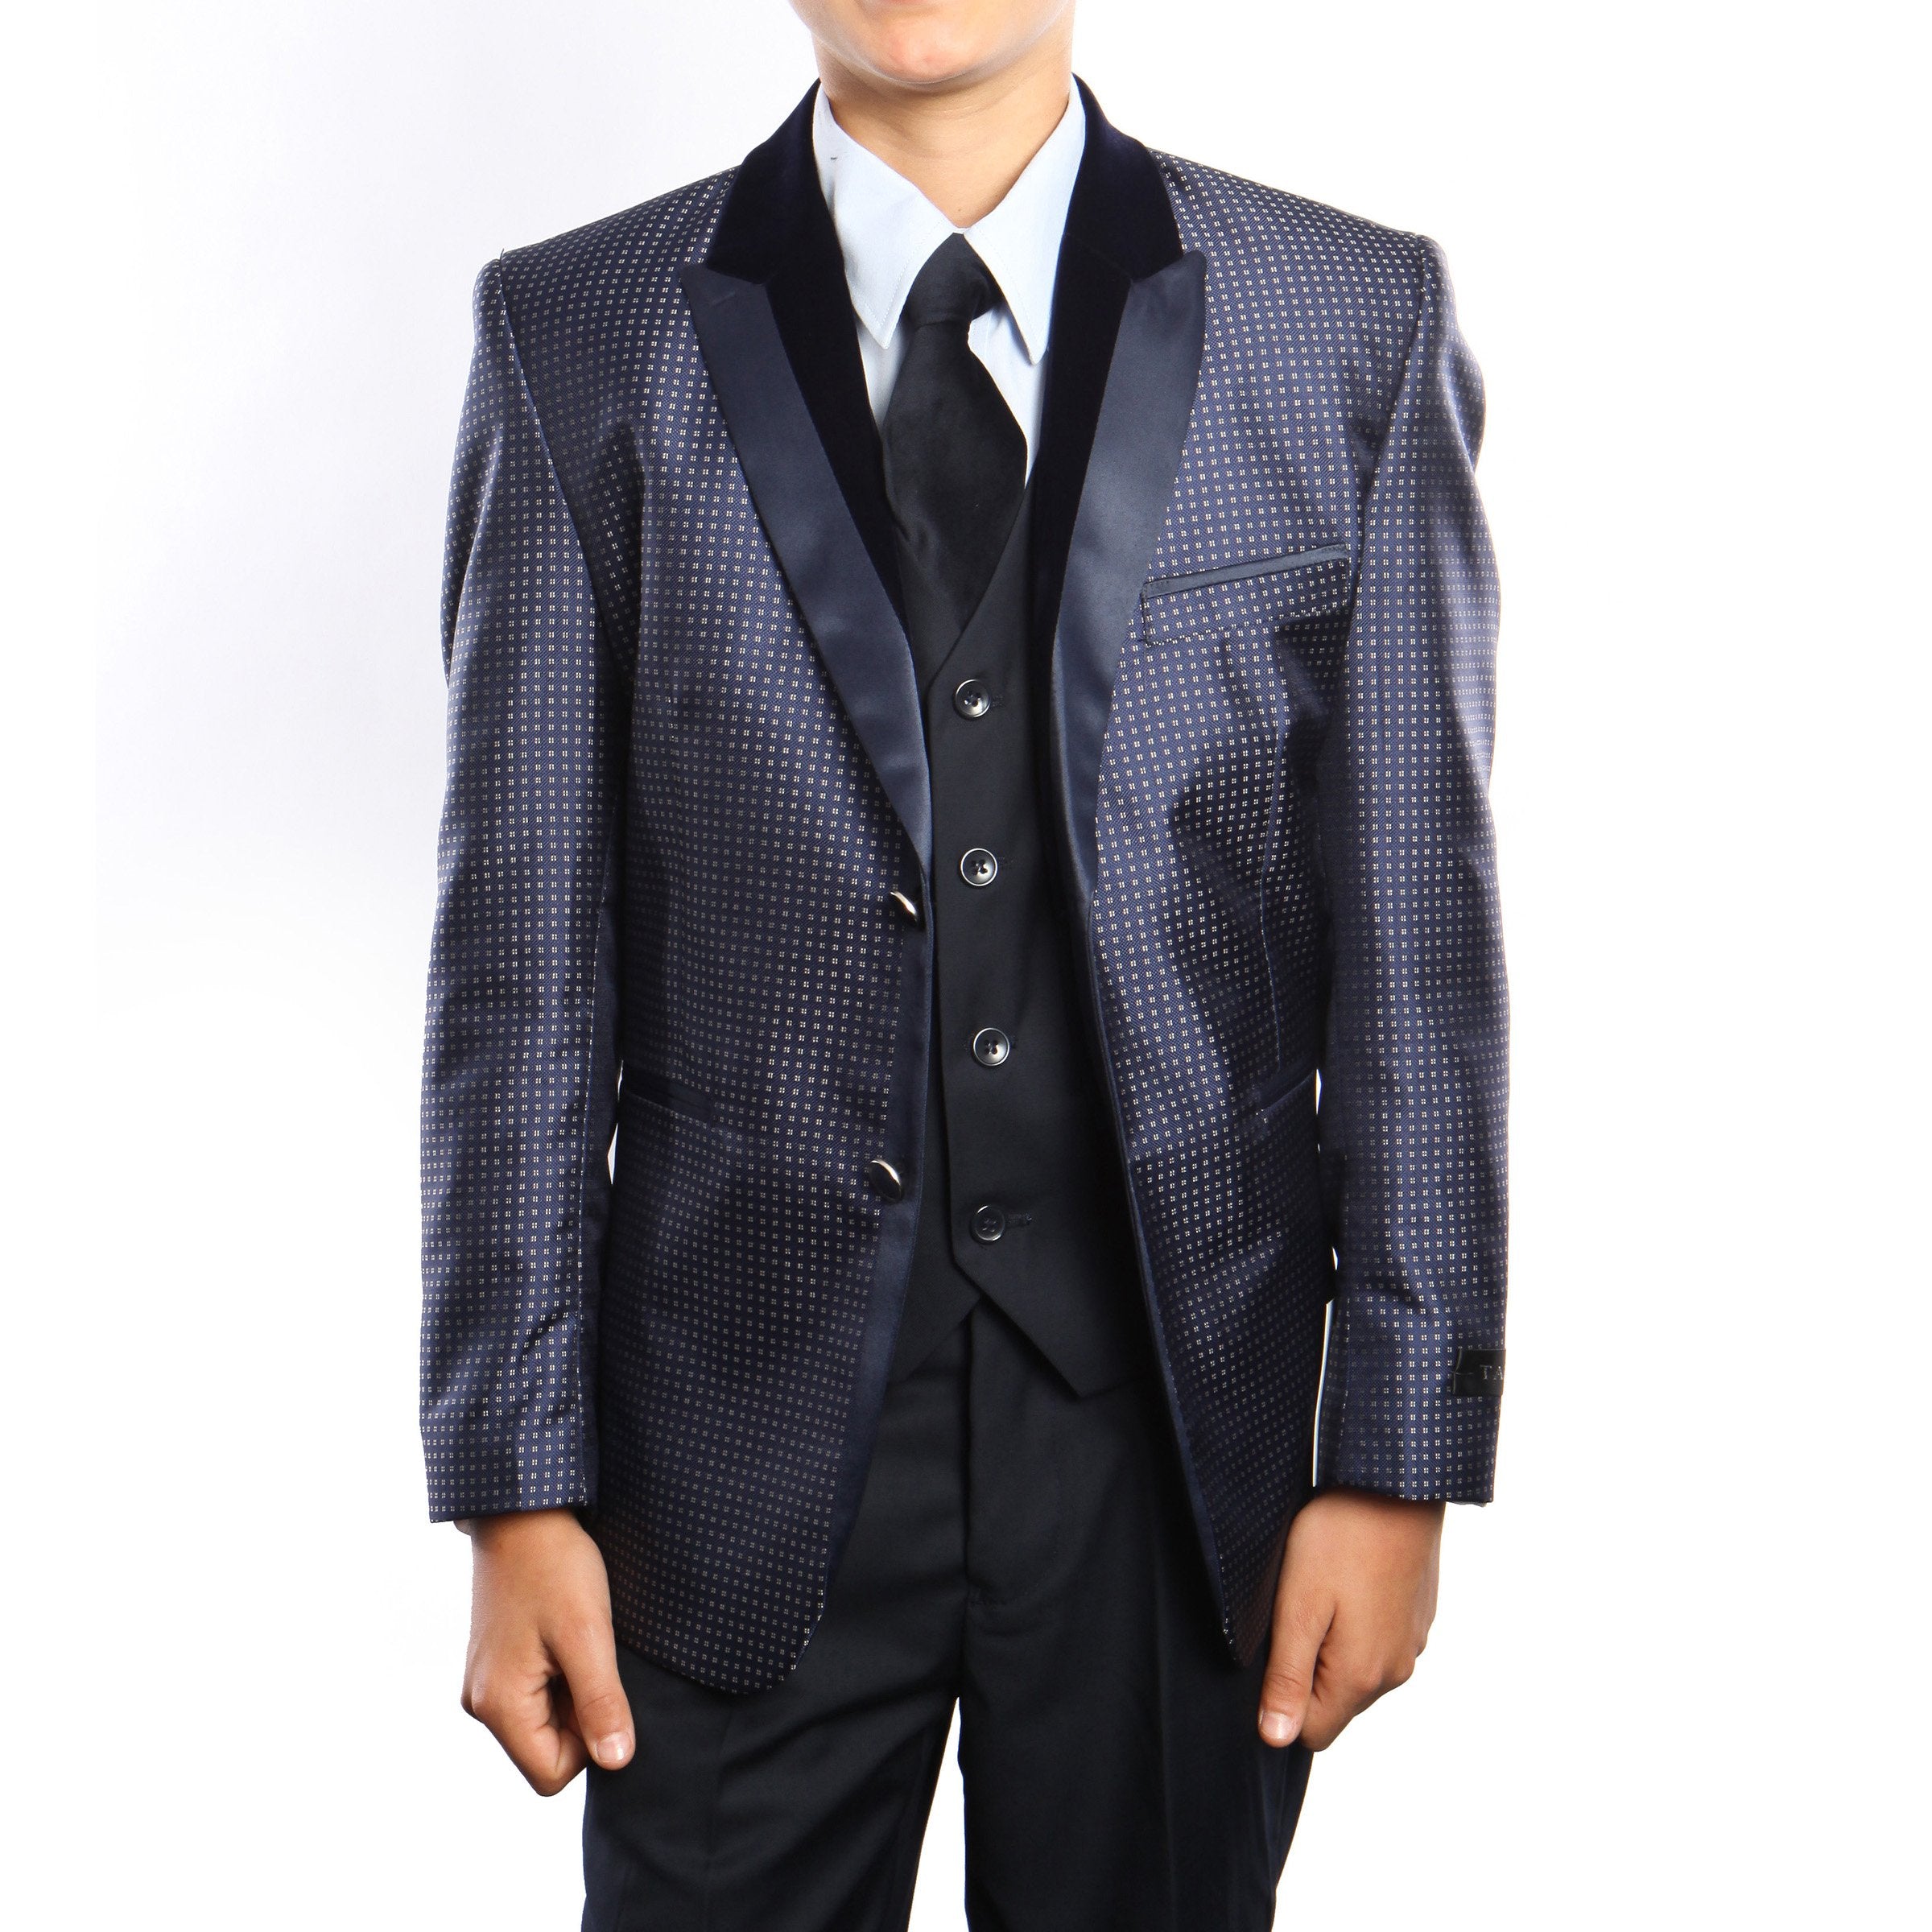 Micro Dot Pattern Suit With Shirt & Tie Suits For Boy's